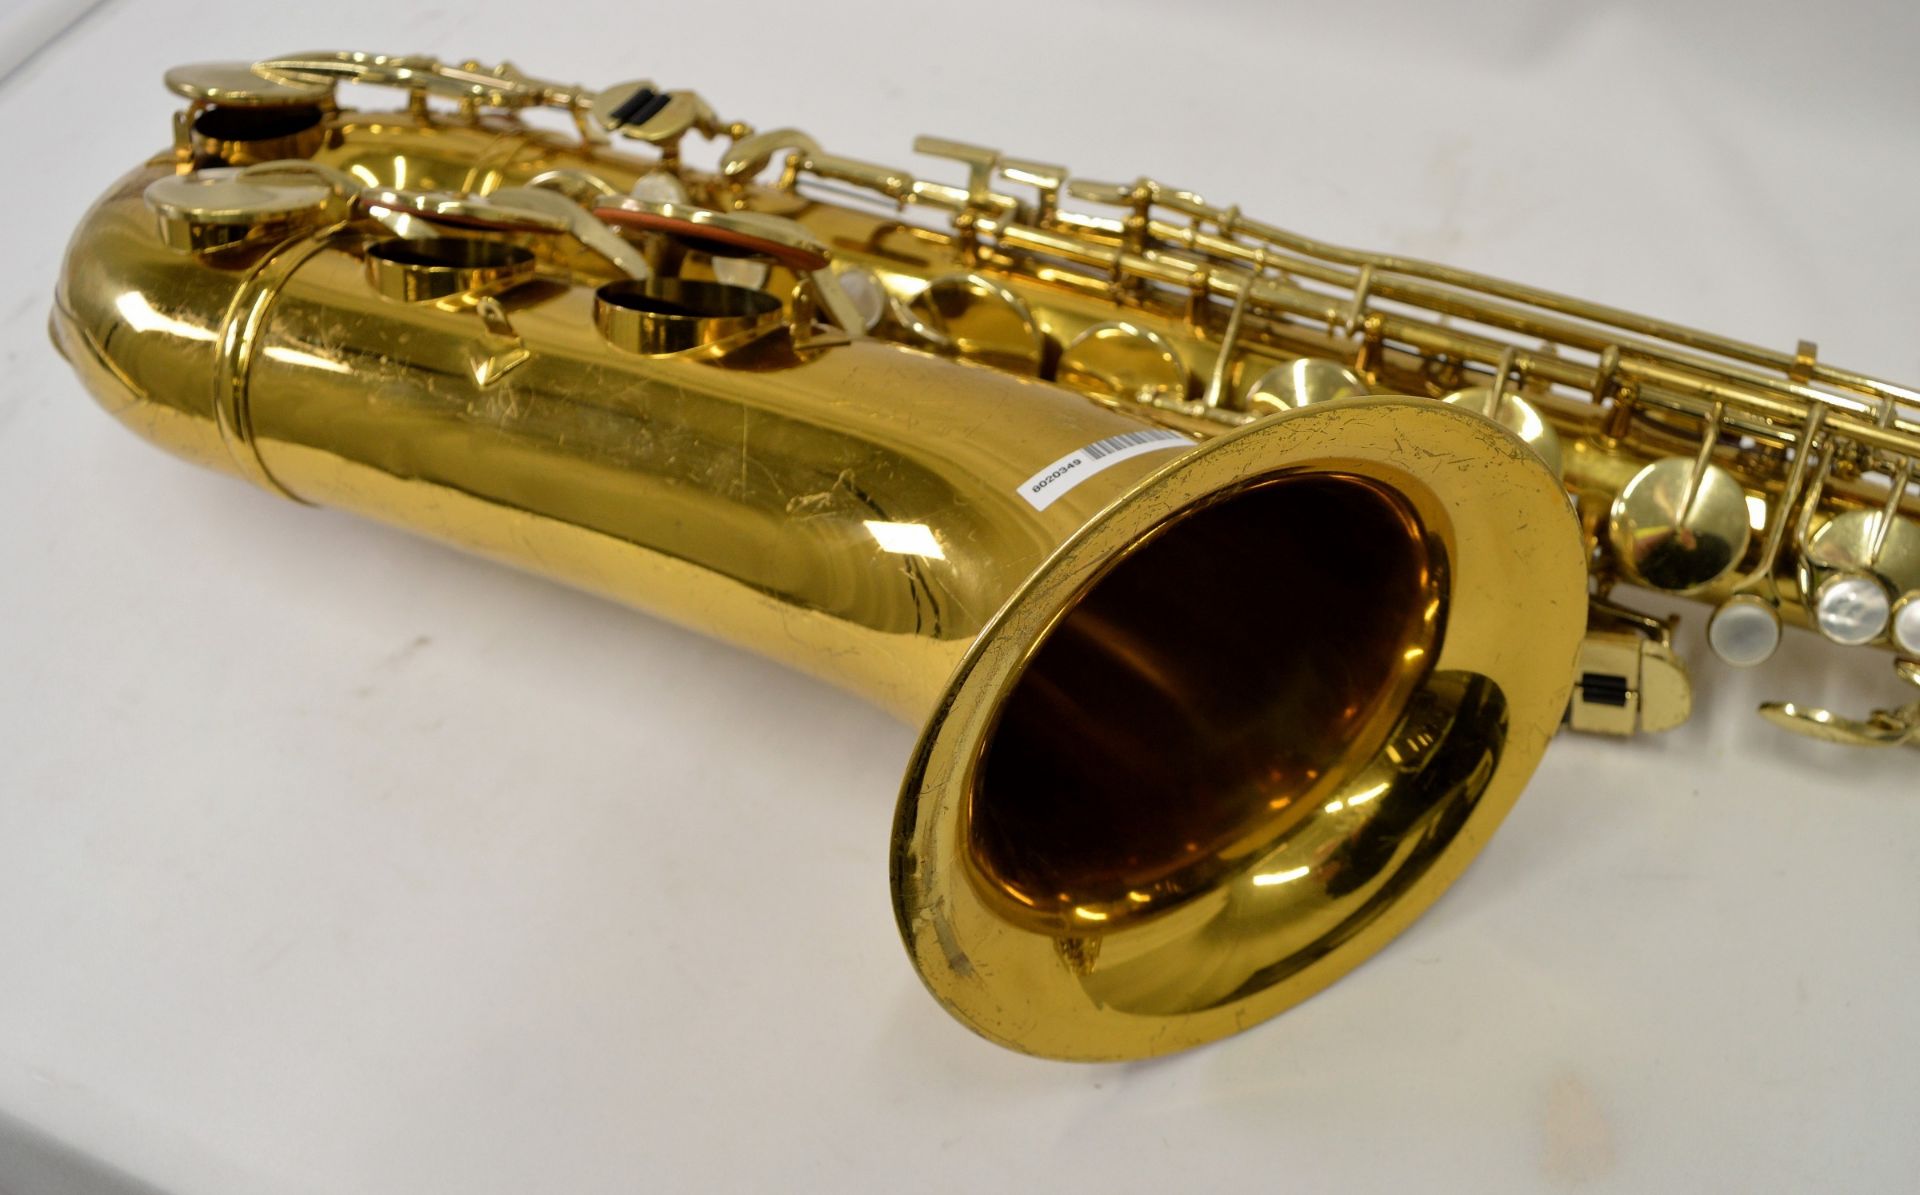 King Model 2416 Saxophone with Case. Serial No. 871174. - Image 10 of 23